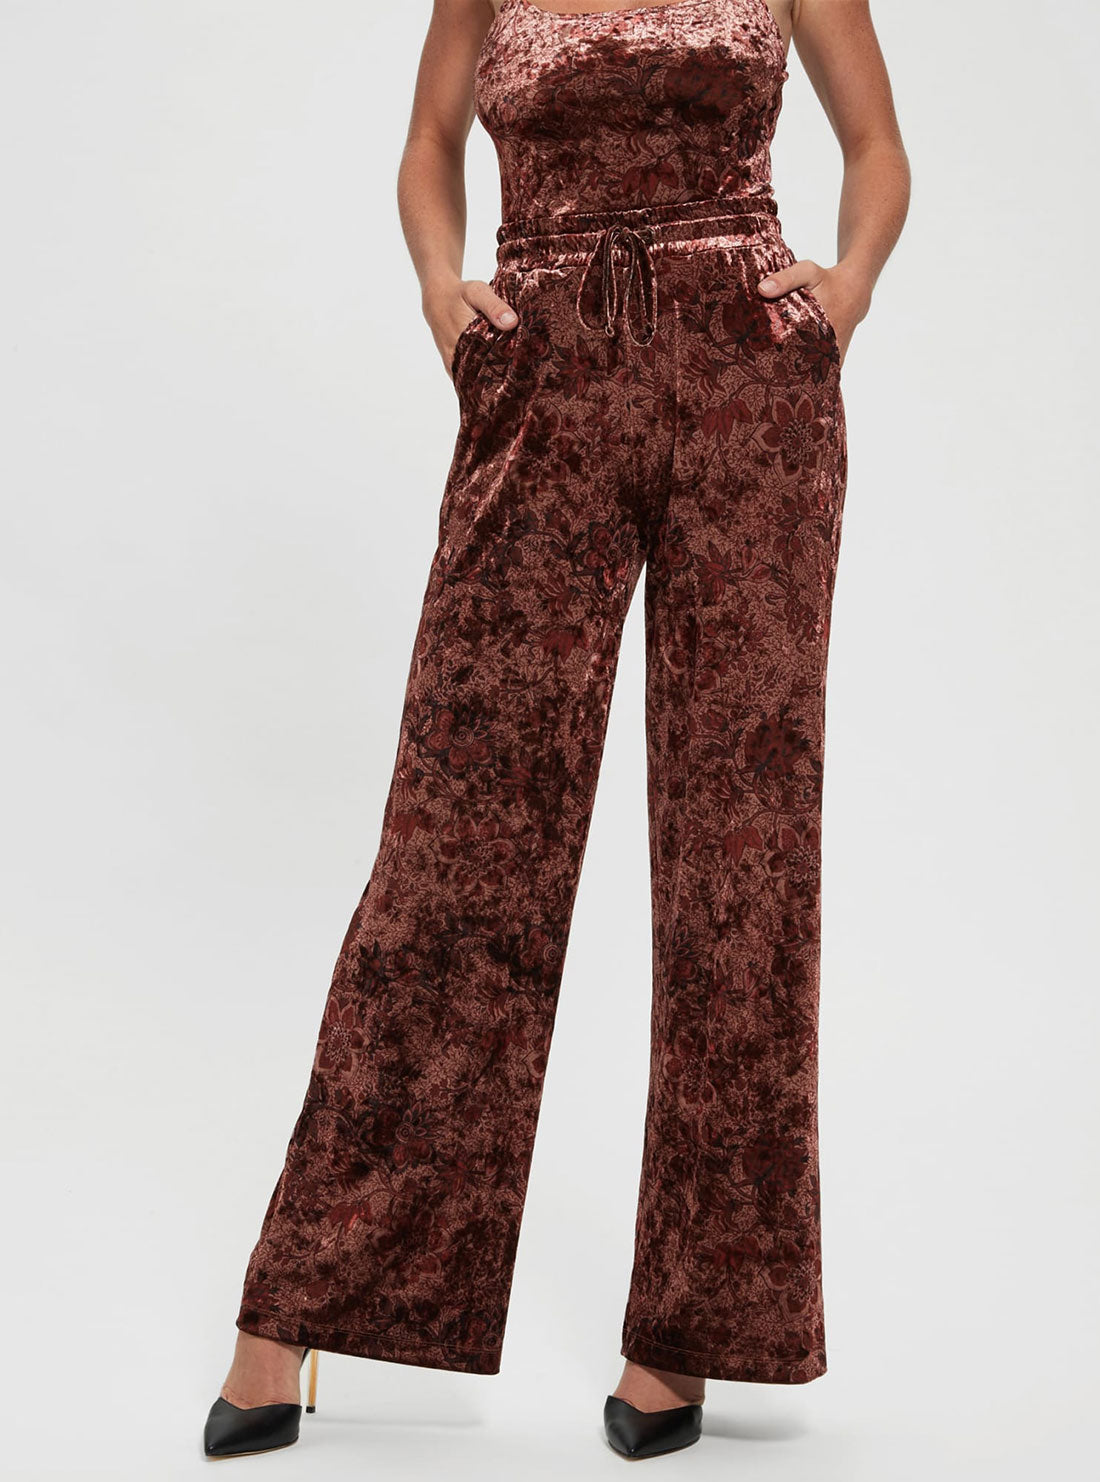 GUESS Women's Spice Floral Jade Pants W2BB41KATV0 Front View